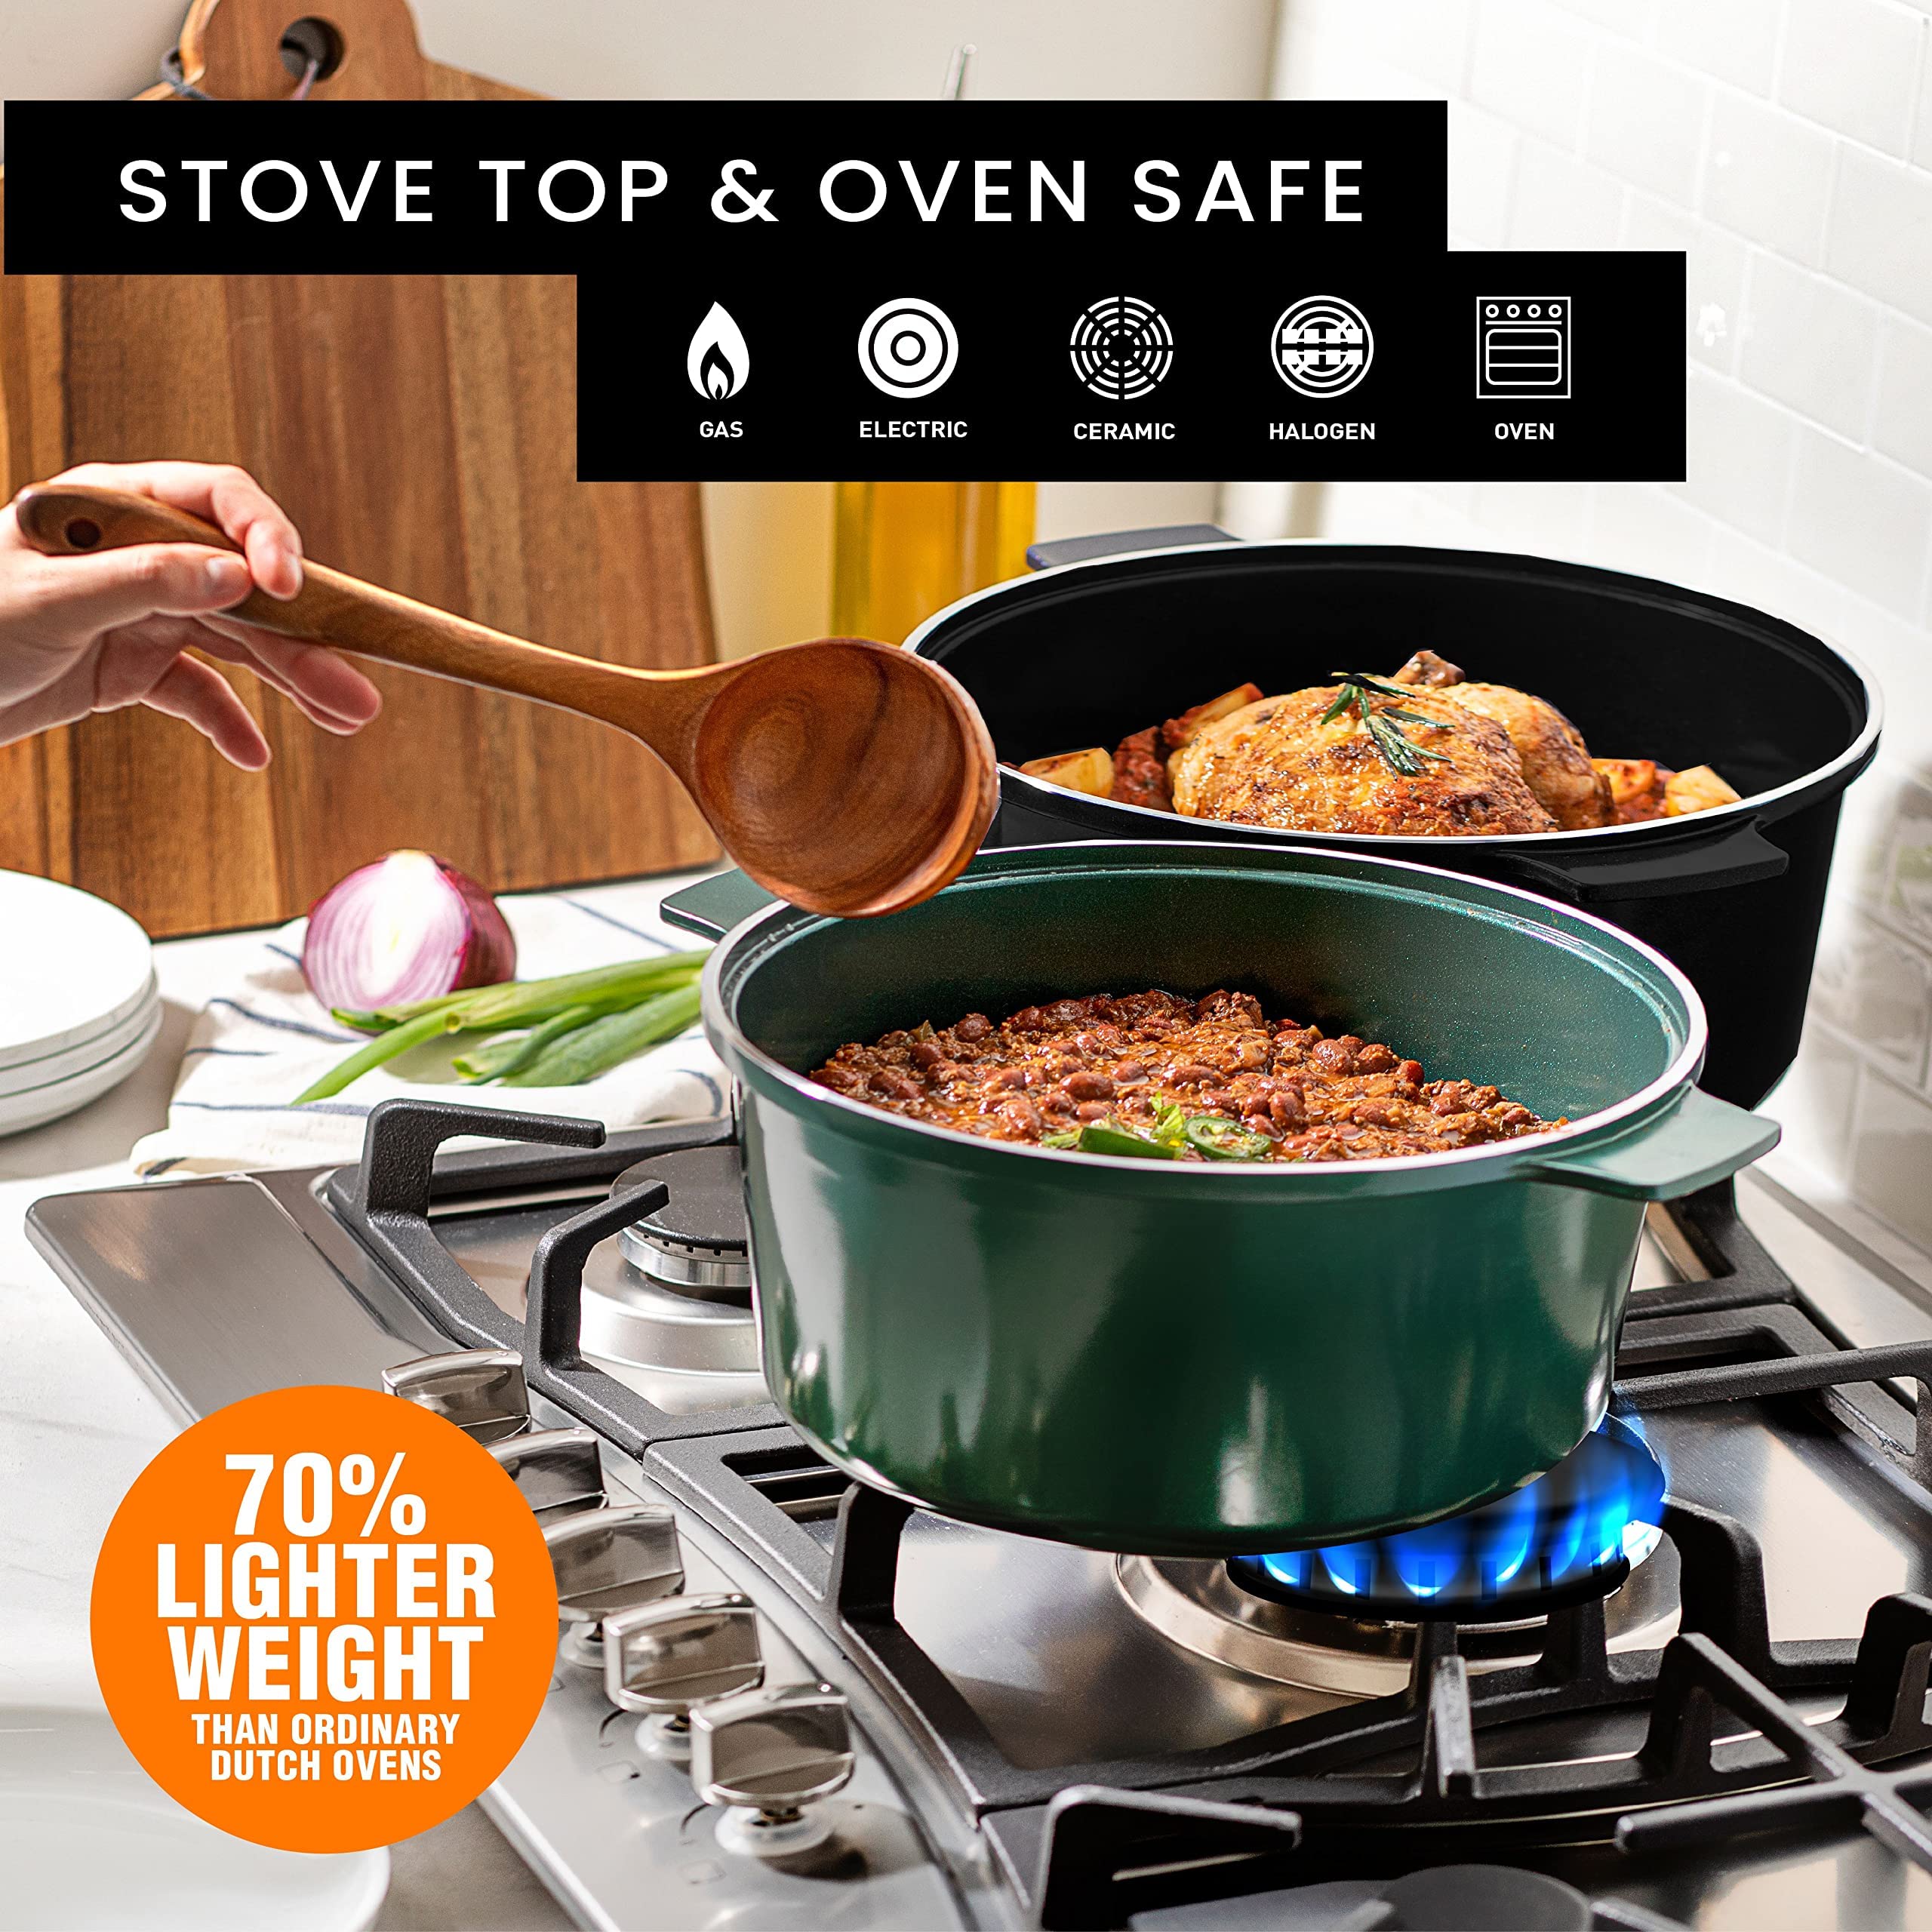 Granitestone 5 Qt Nonstick Dutch Oven, Stovetop & Oven Safe with Lid - Toxin Free